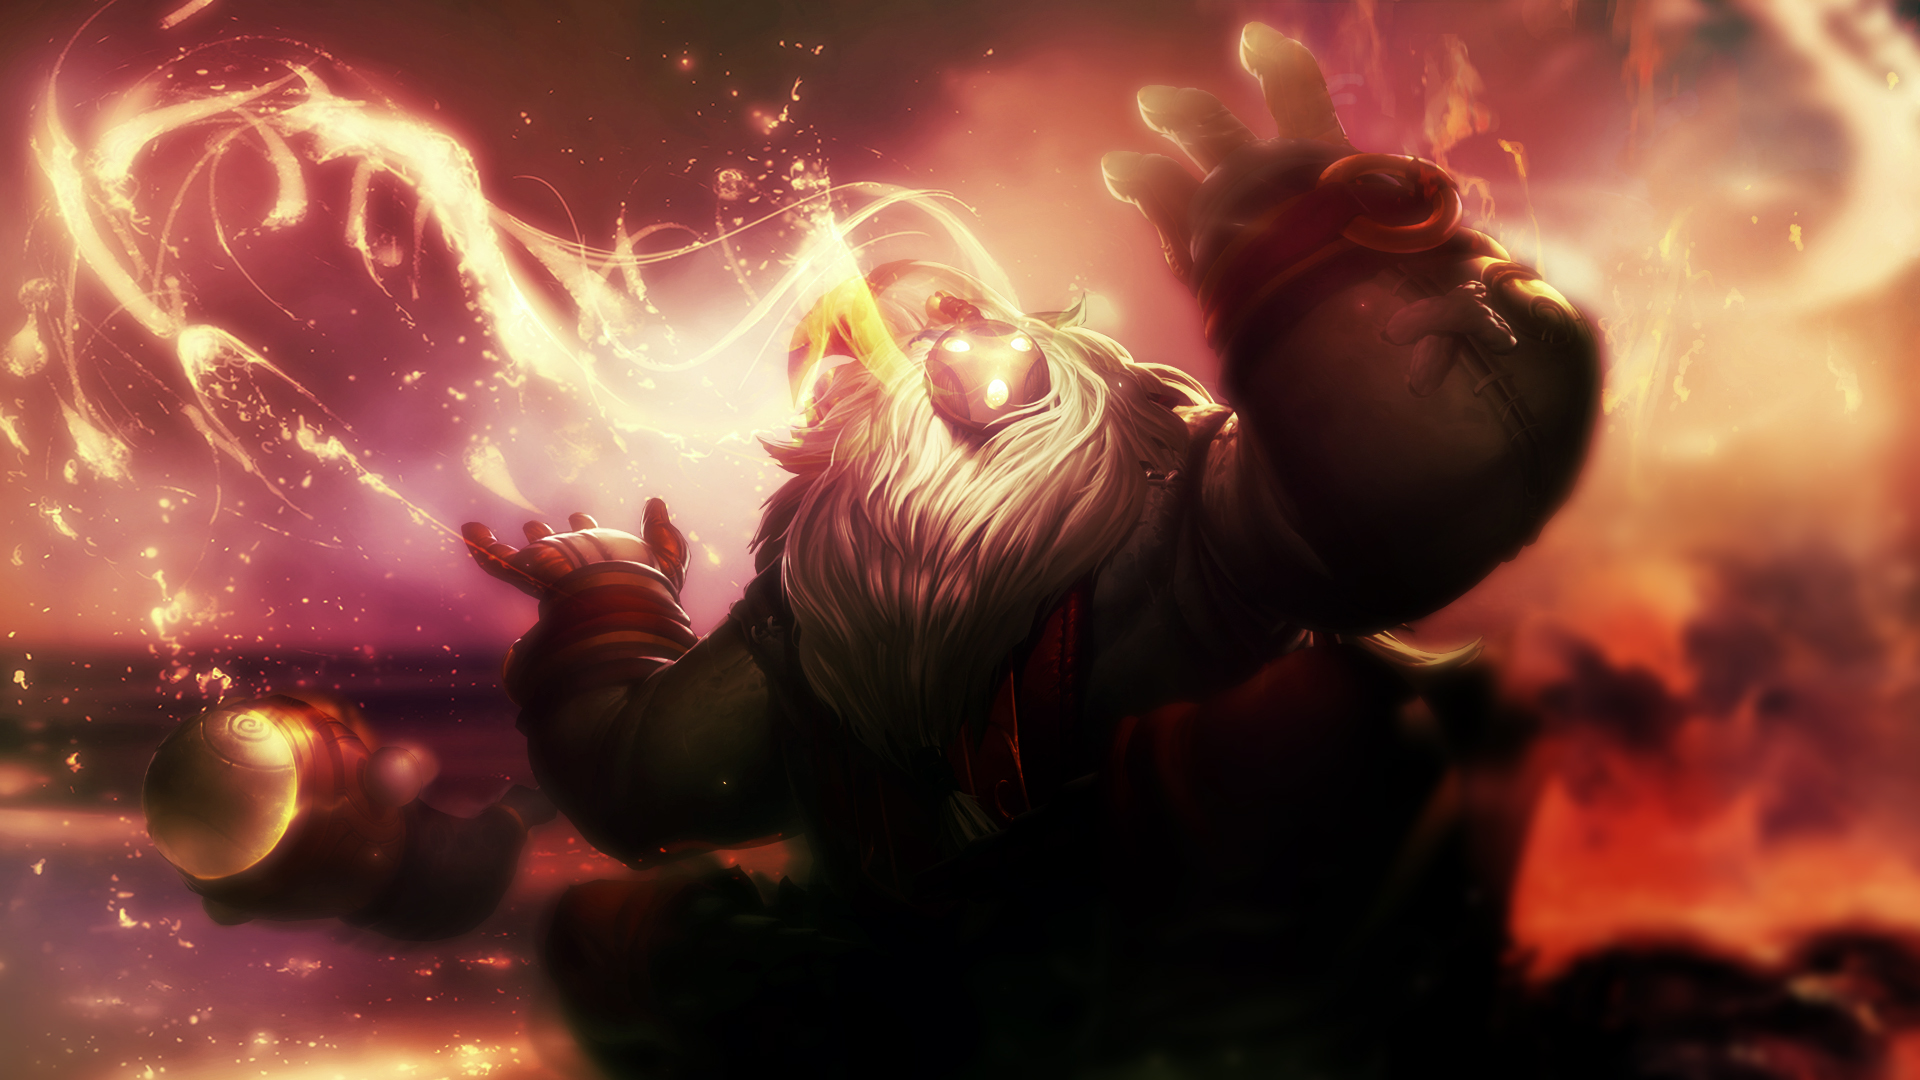 Bard Wallpapers, CK39 HD Wallpapers For Desktop And Mobile